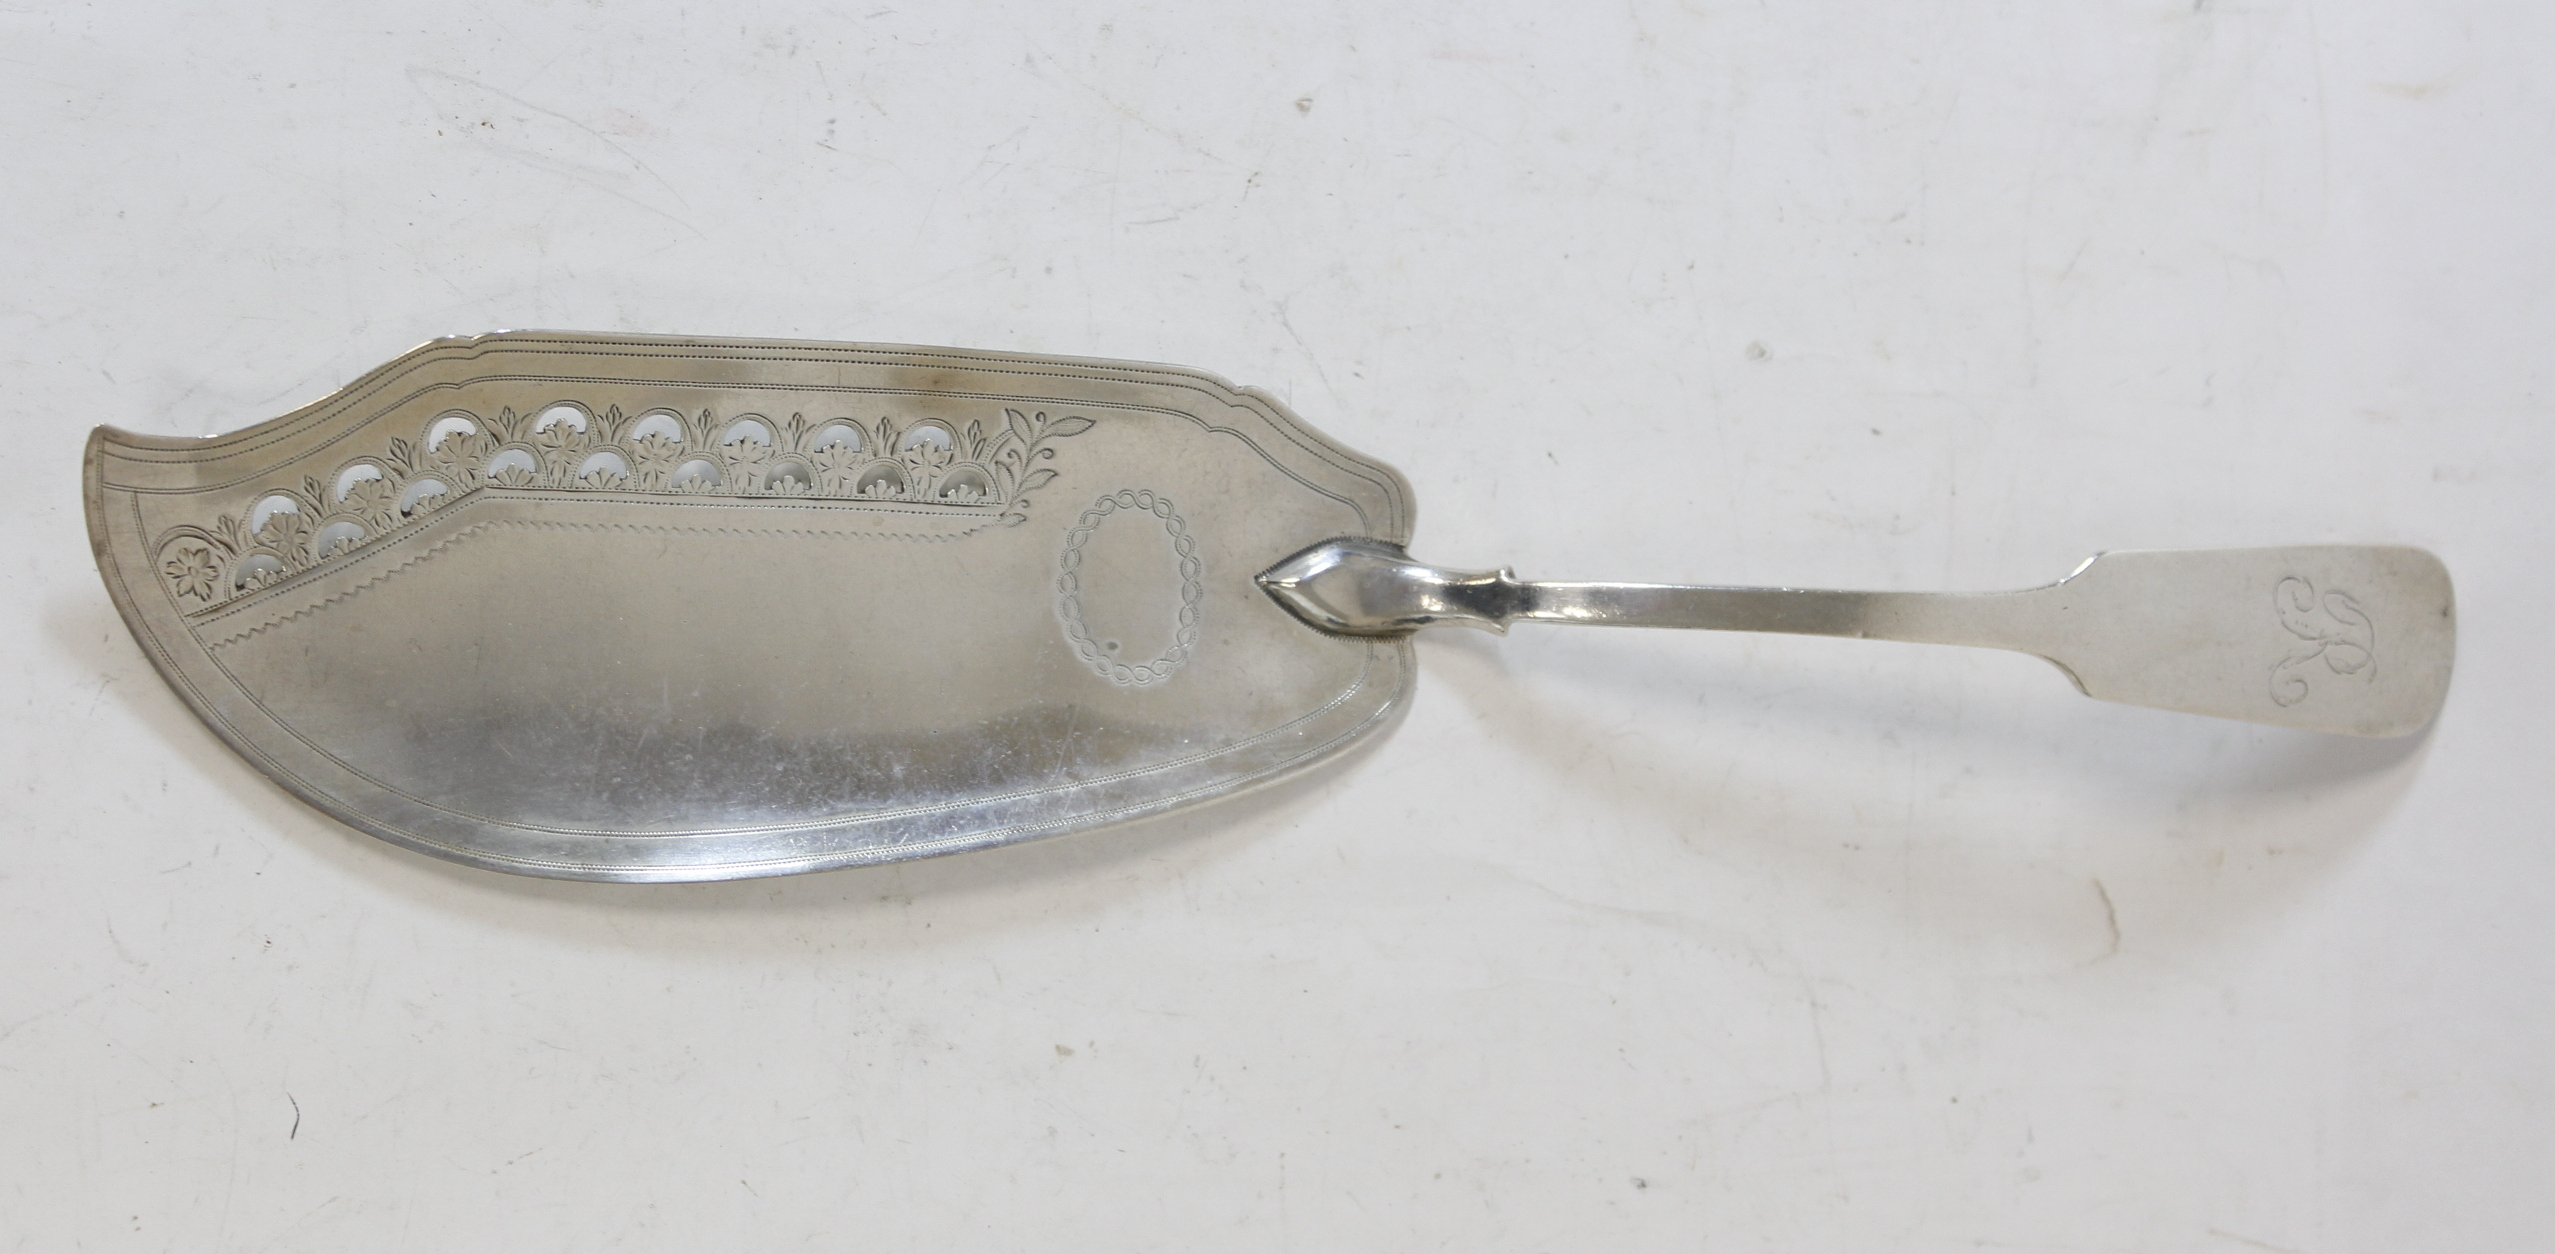 Silver fish server, fiddle pattern, pierced and engraved by Abstainando King, 1808, 3 1/2oz / 123g. - Image 2 of 5